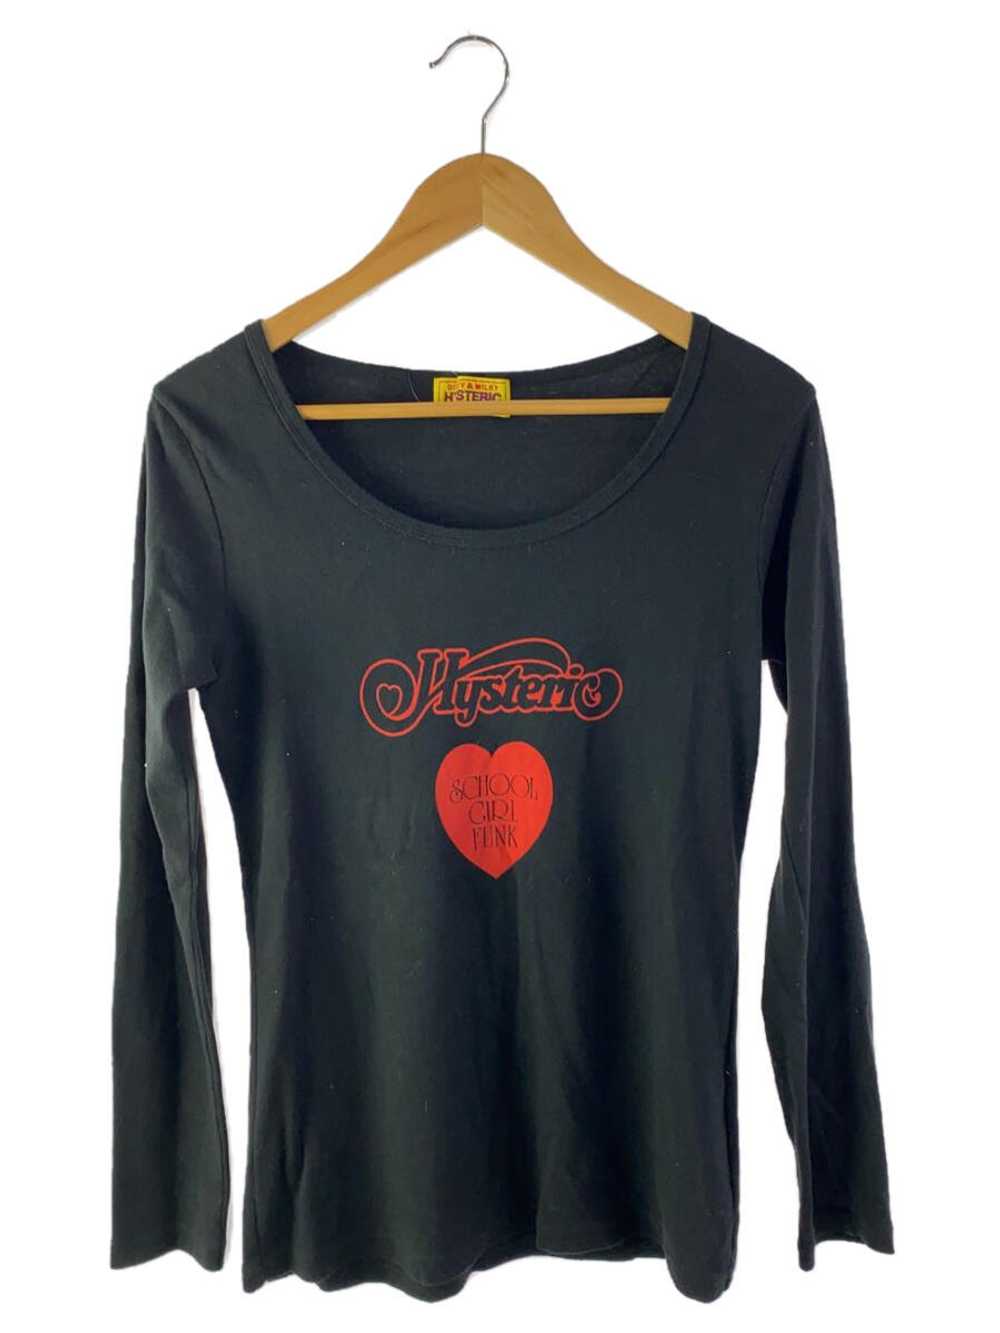 Used Hysteric Glamor Long Sleeve T-Shirt/Free/Cot… - image 1